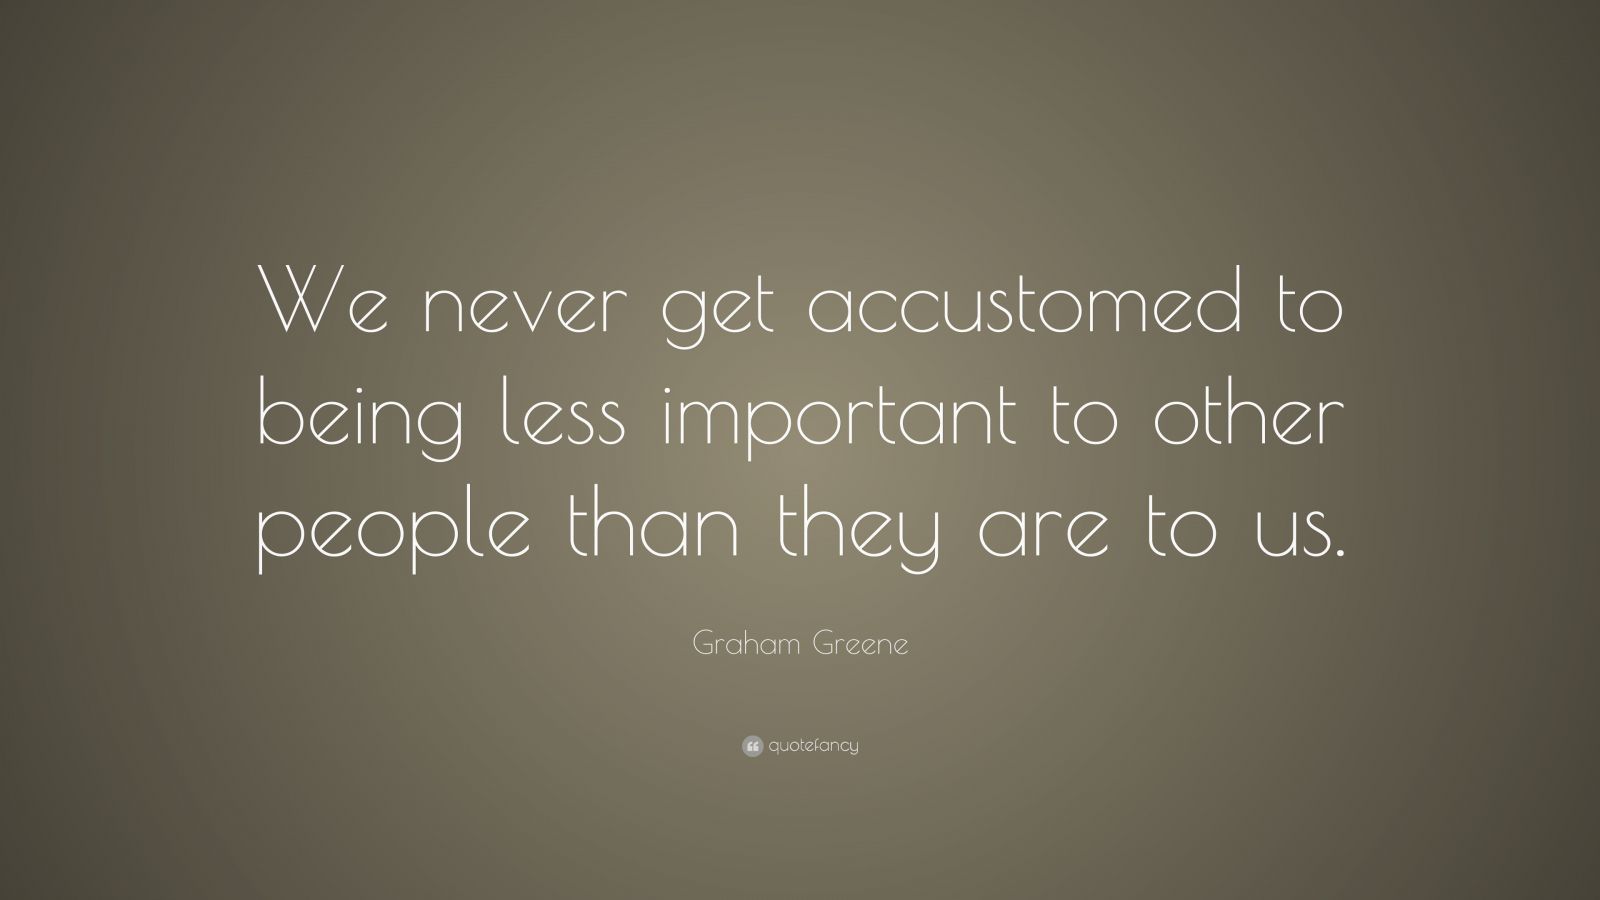 Graham Greene Quote: We never get accustomed to being less important